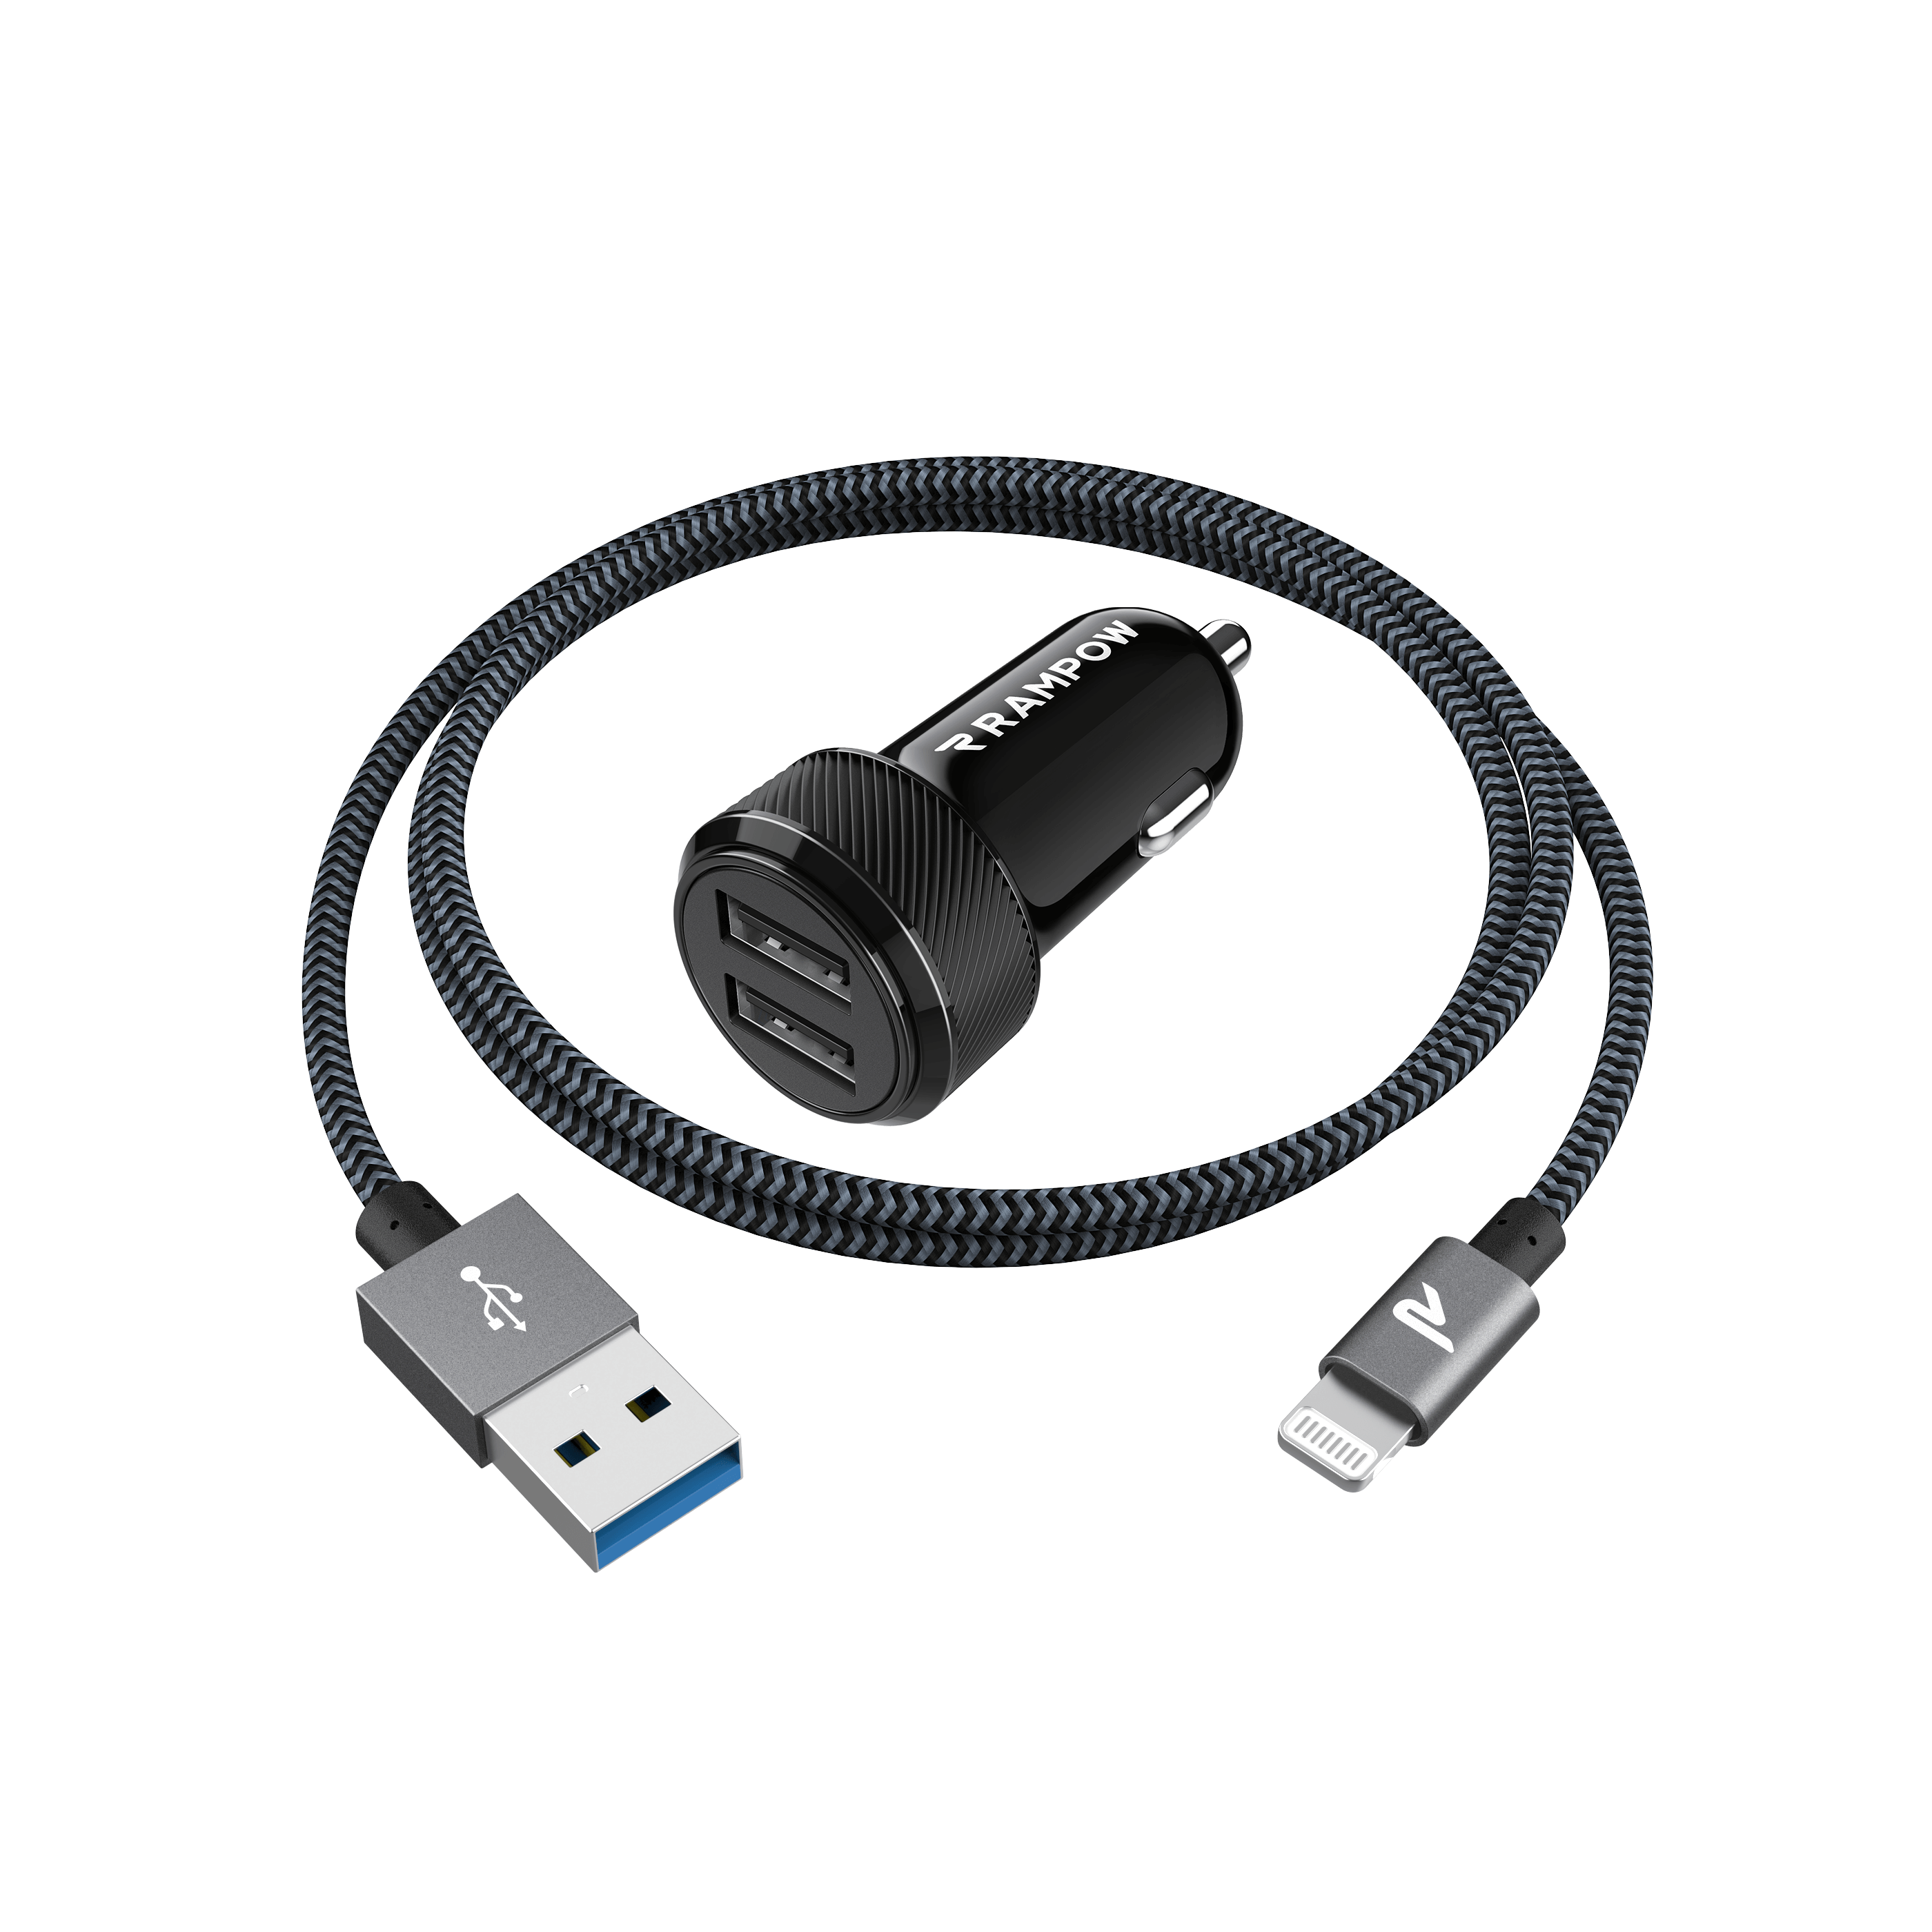 RAMPOW---Cable-USB-C-a-USB-3.0-(3,3ft)